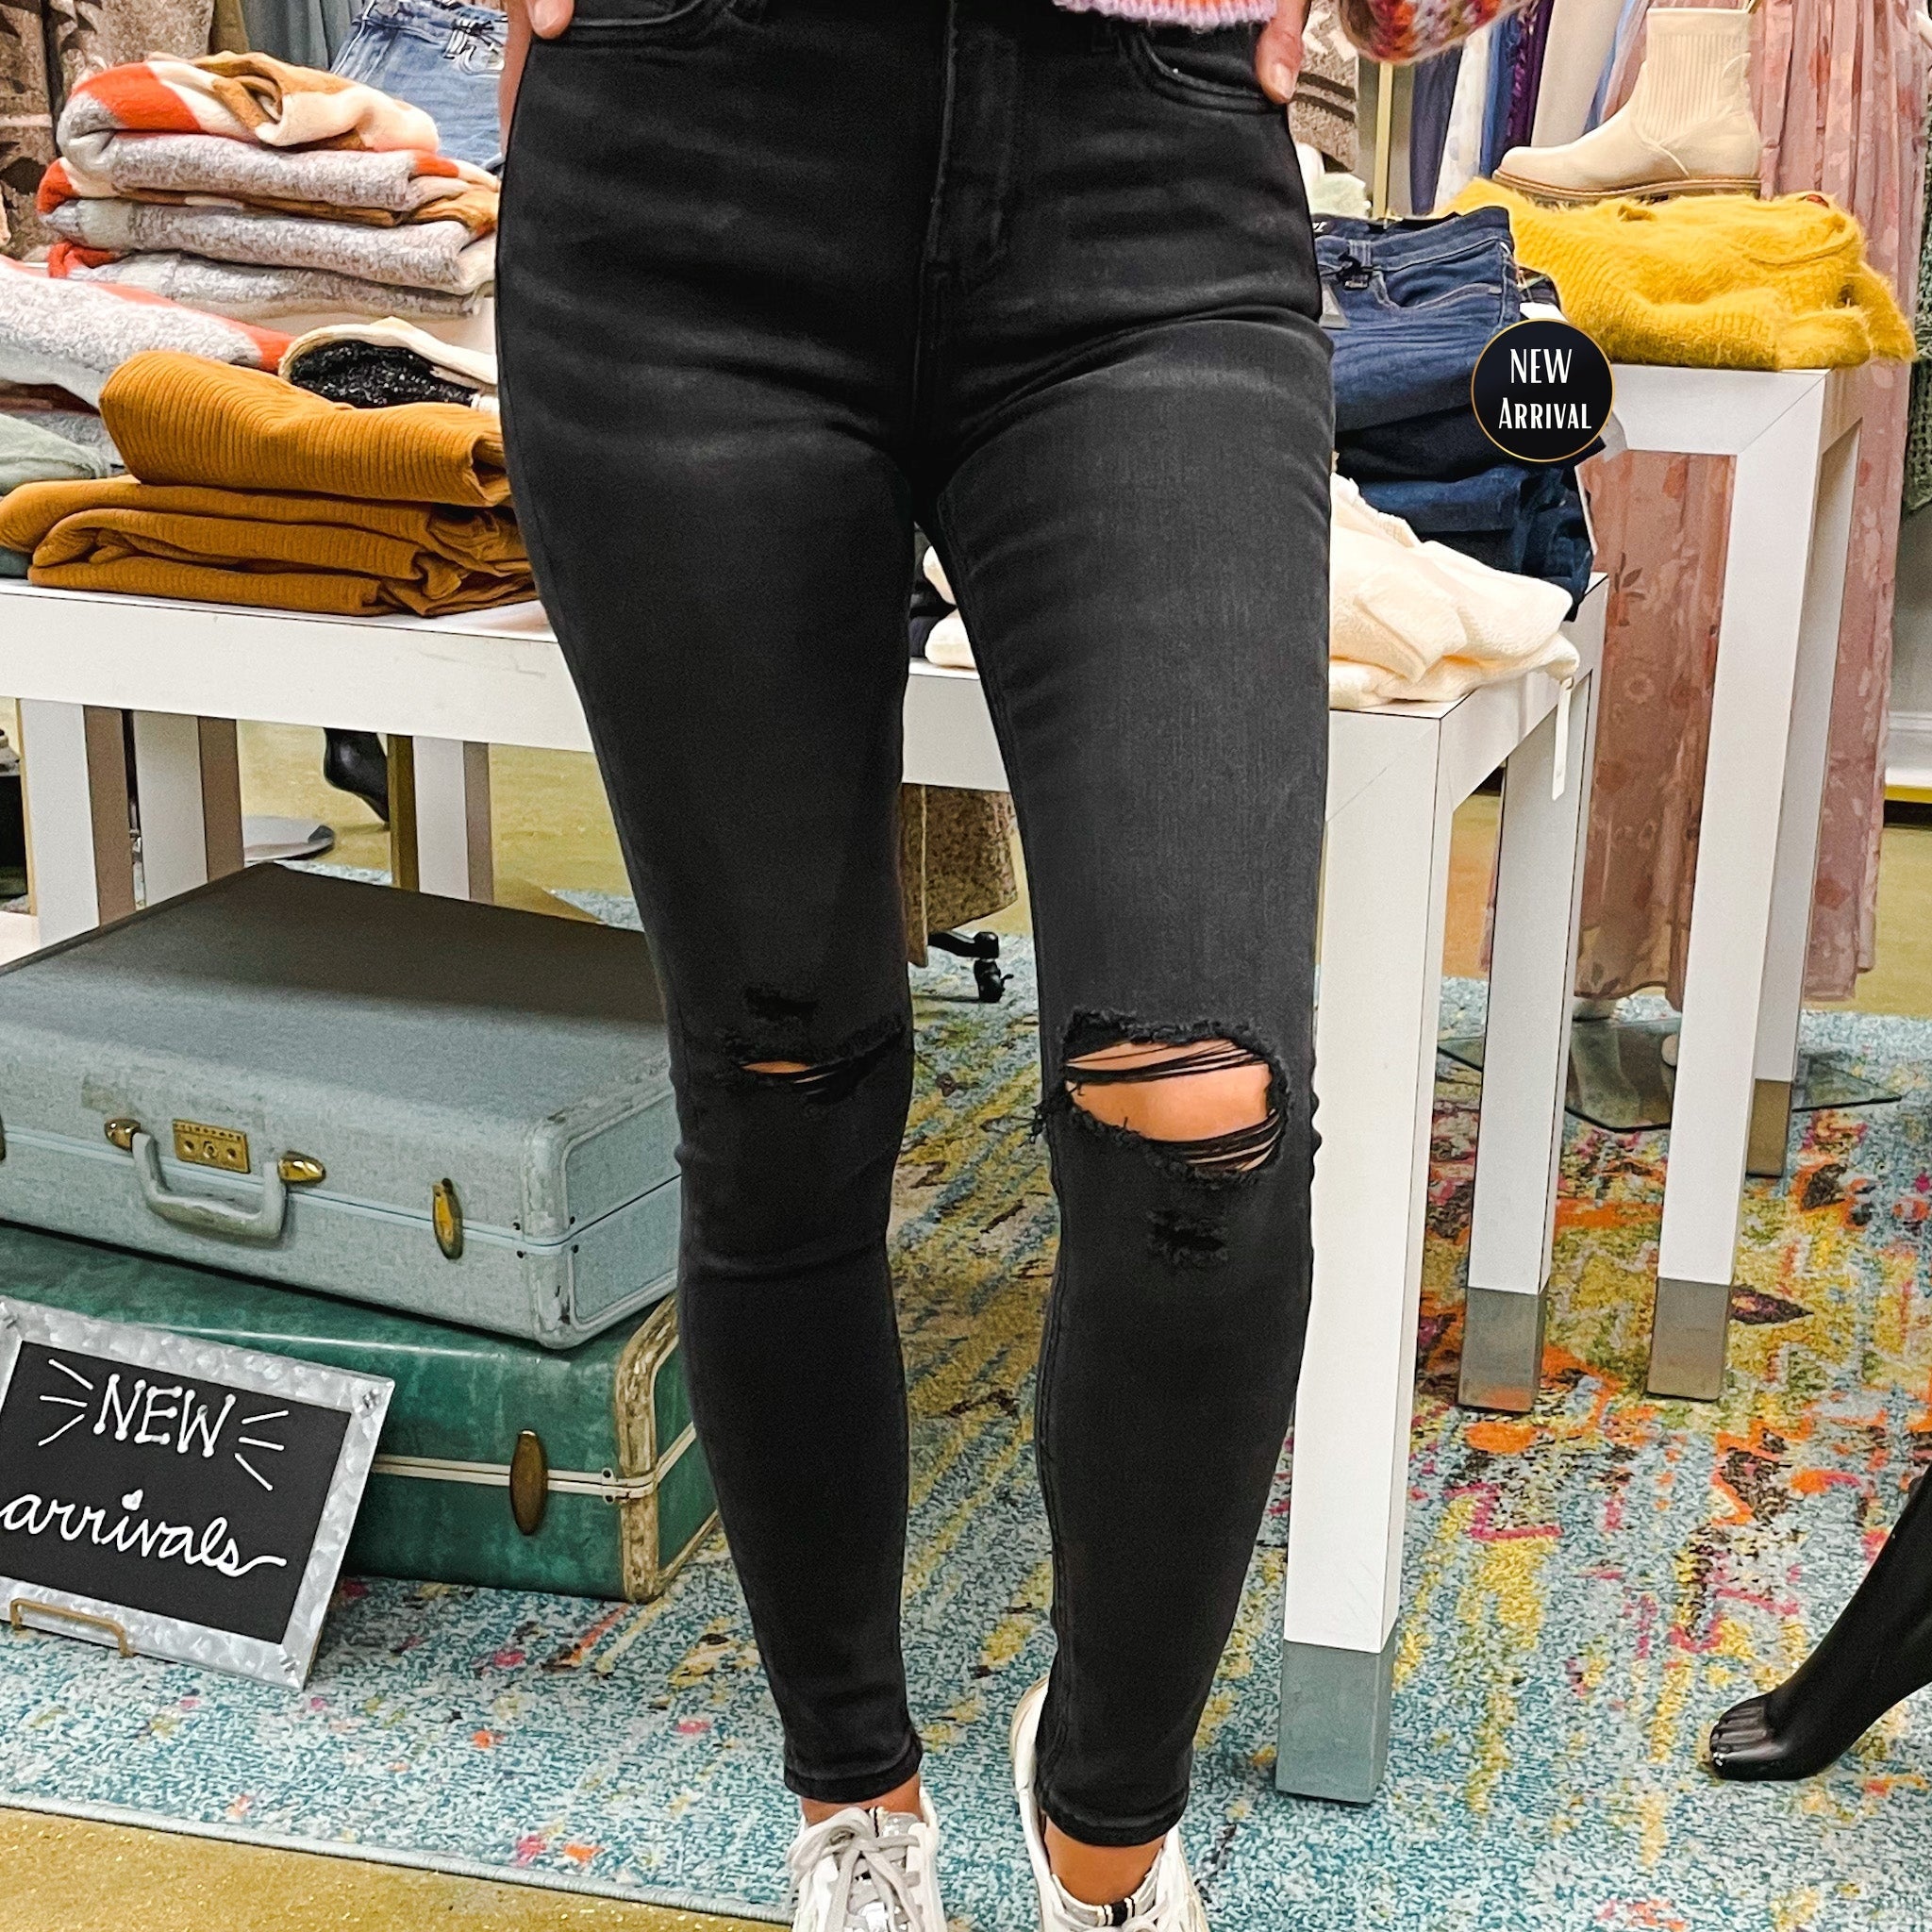 The City - Super Soft High Rise Skinny Jeans